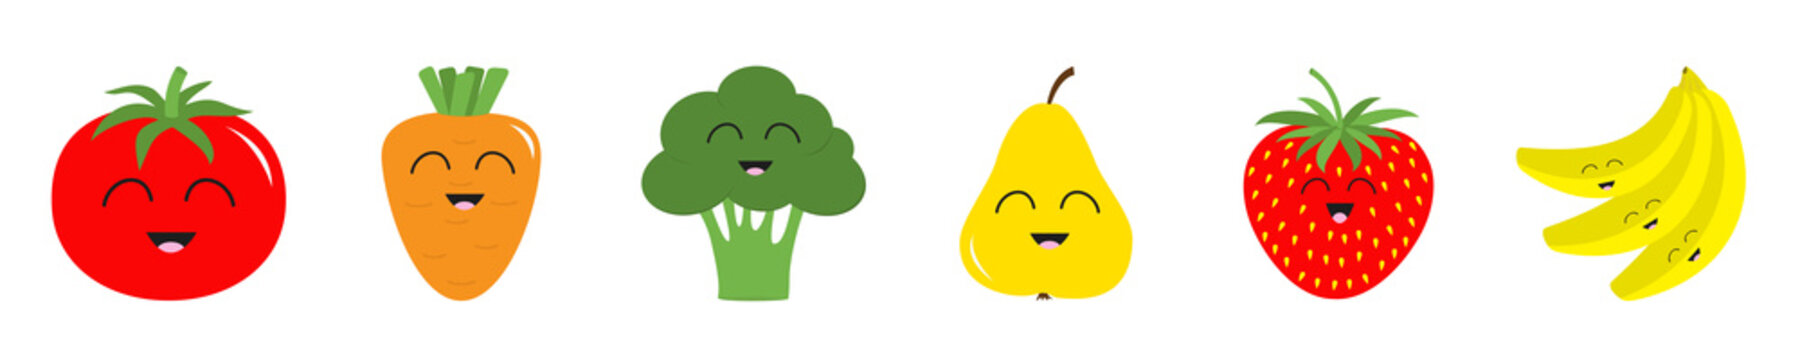 Fruit berry vegetable smiling face icon set line. Pear strawberry banana,Tomato, carrot broccoli. Cute cartoon kawaii character. Flat design. White background.